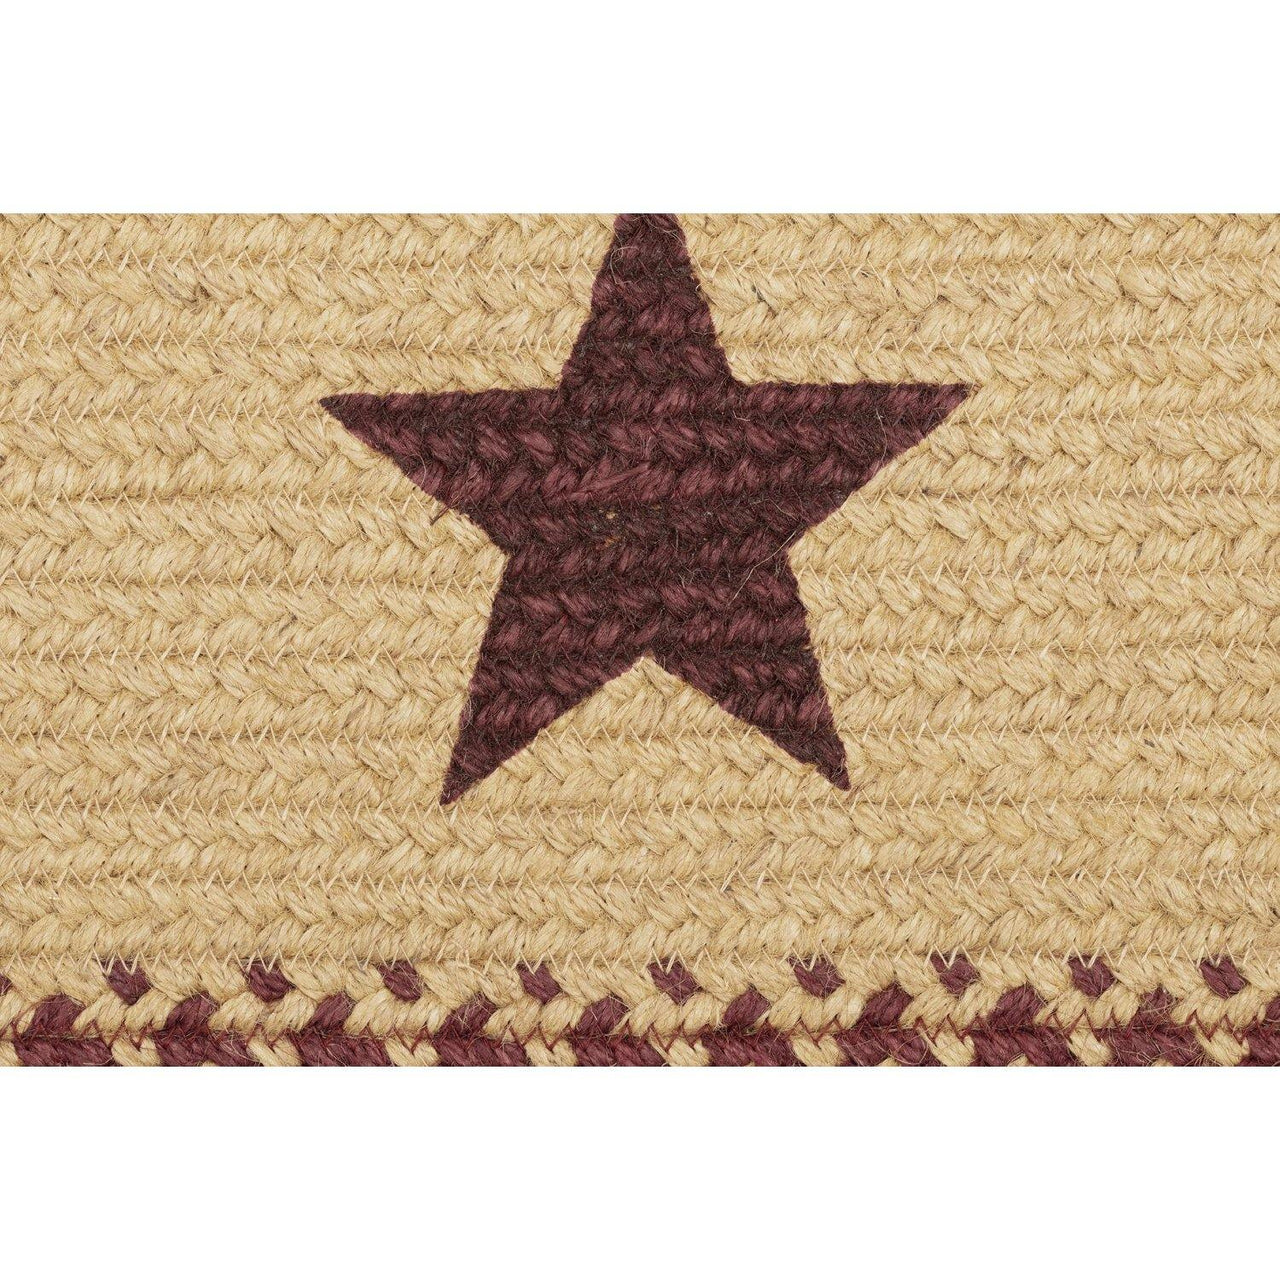 Burgundy Red Primitive Jute Braided Rug Oval Stencil Stars Welcome 20"x30" with Rug Pad VHC Brands - The Fox Decor